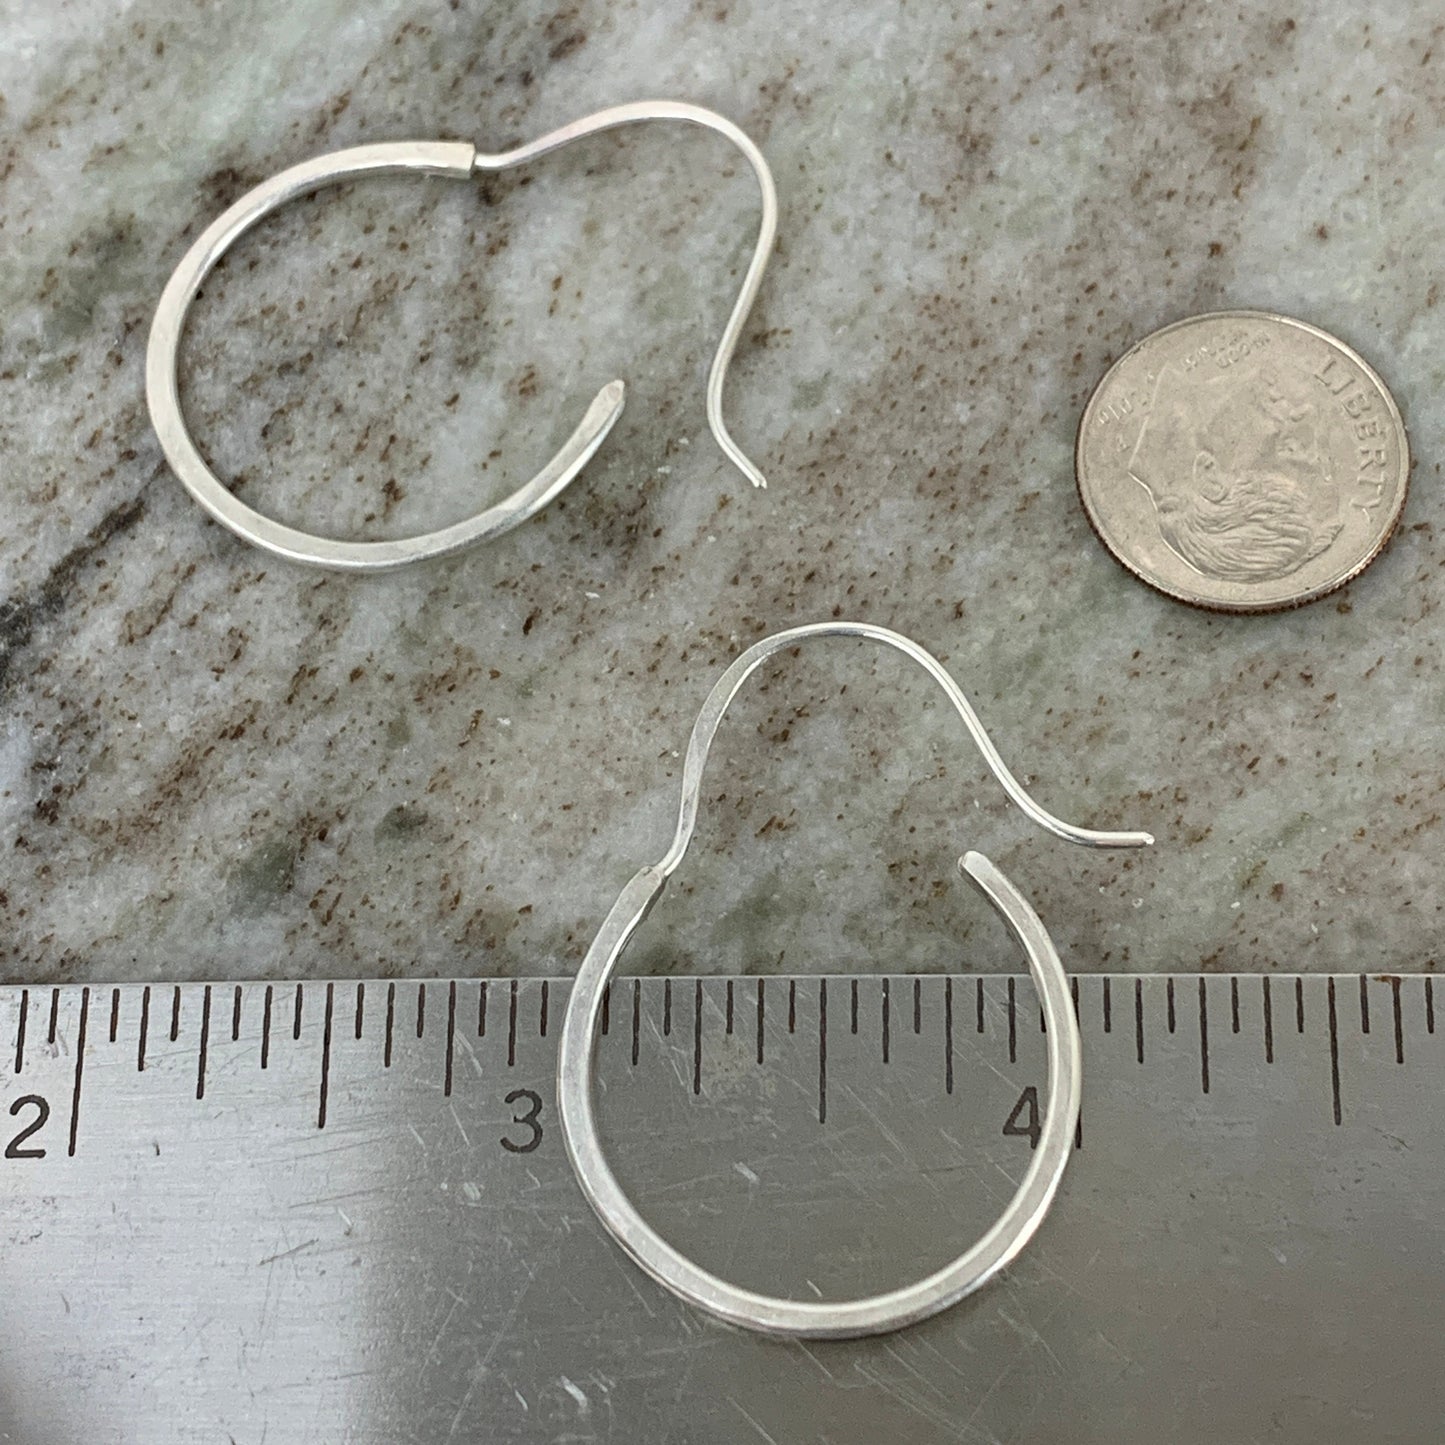 Small silver hoops - sterling silver plain hoops - forged sterling earrings - classic dainty hoops - recycled silver with rustic finish